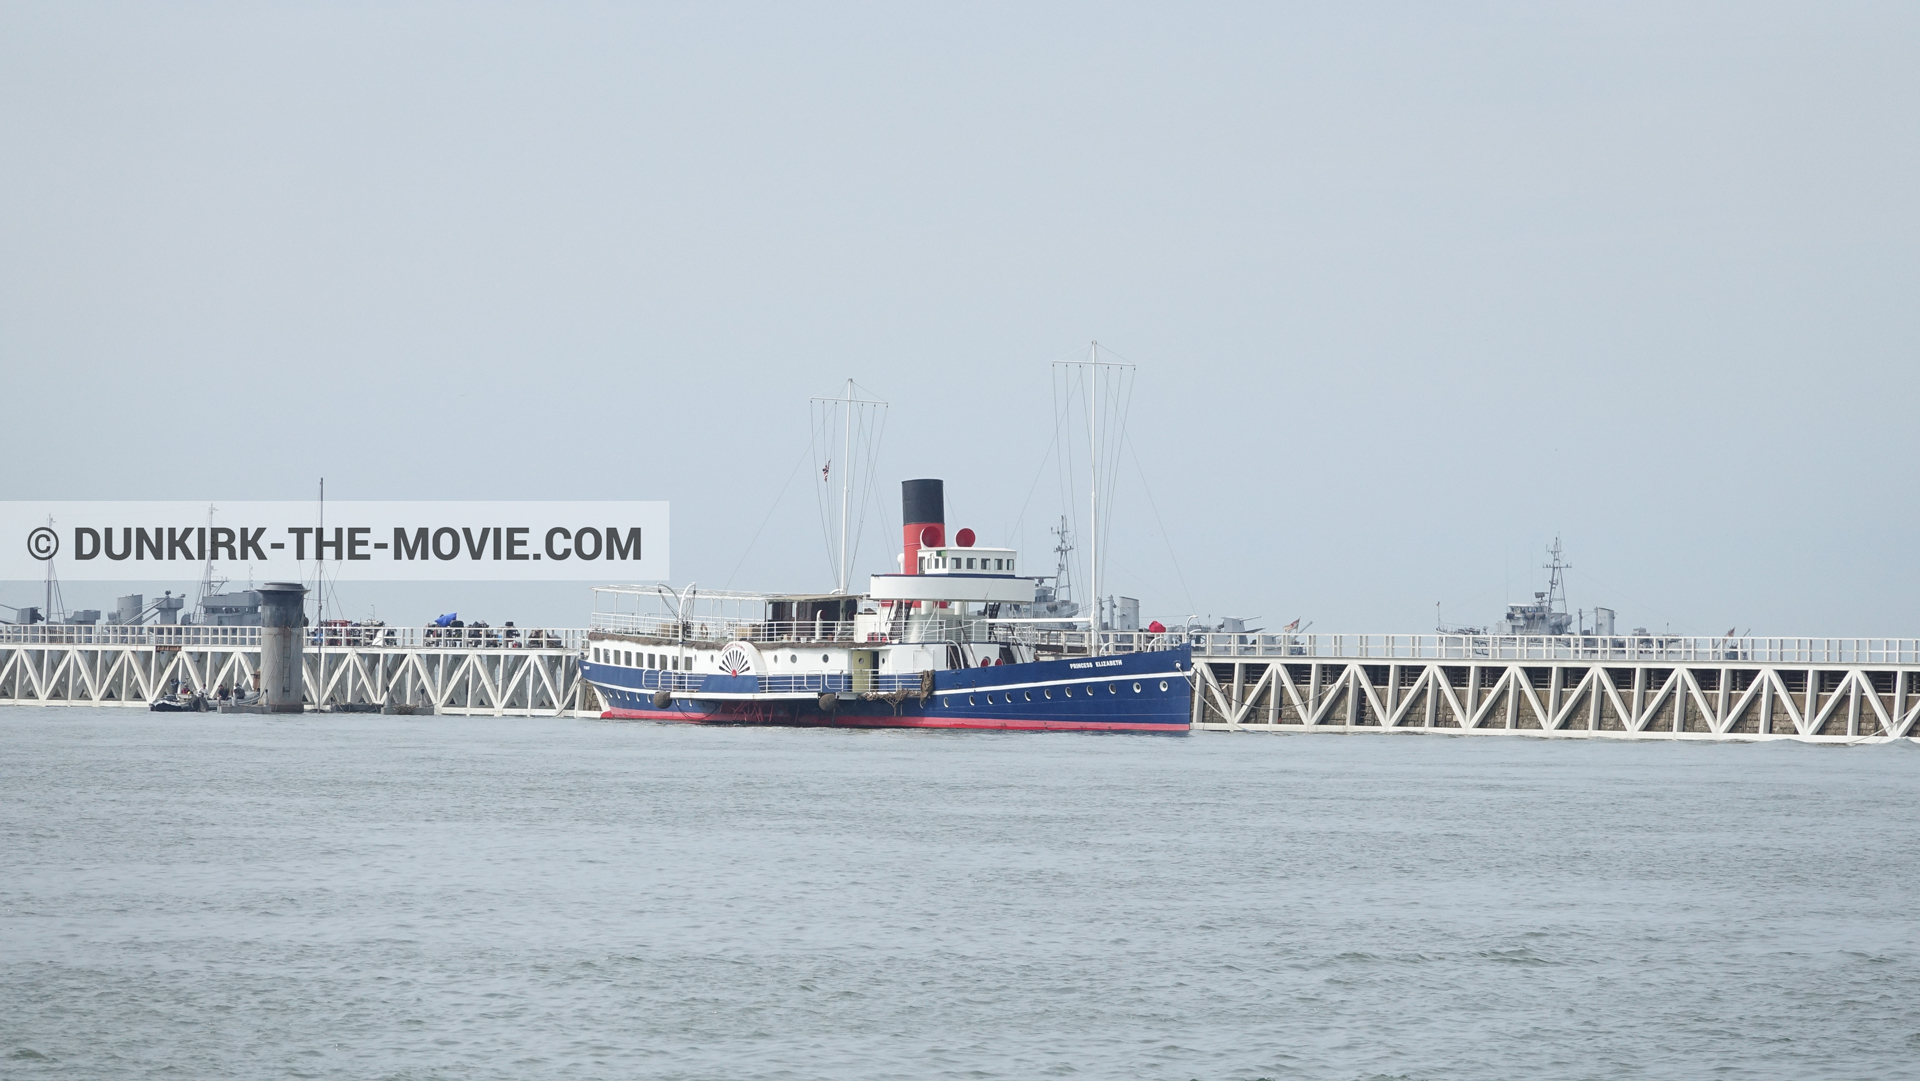 Picture with EST pier, calm sea, Princess Elizabeth,  from behind the scene of the Dunkirk movie by Nolan